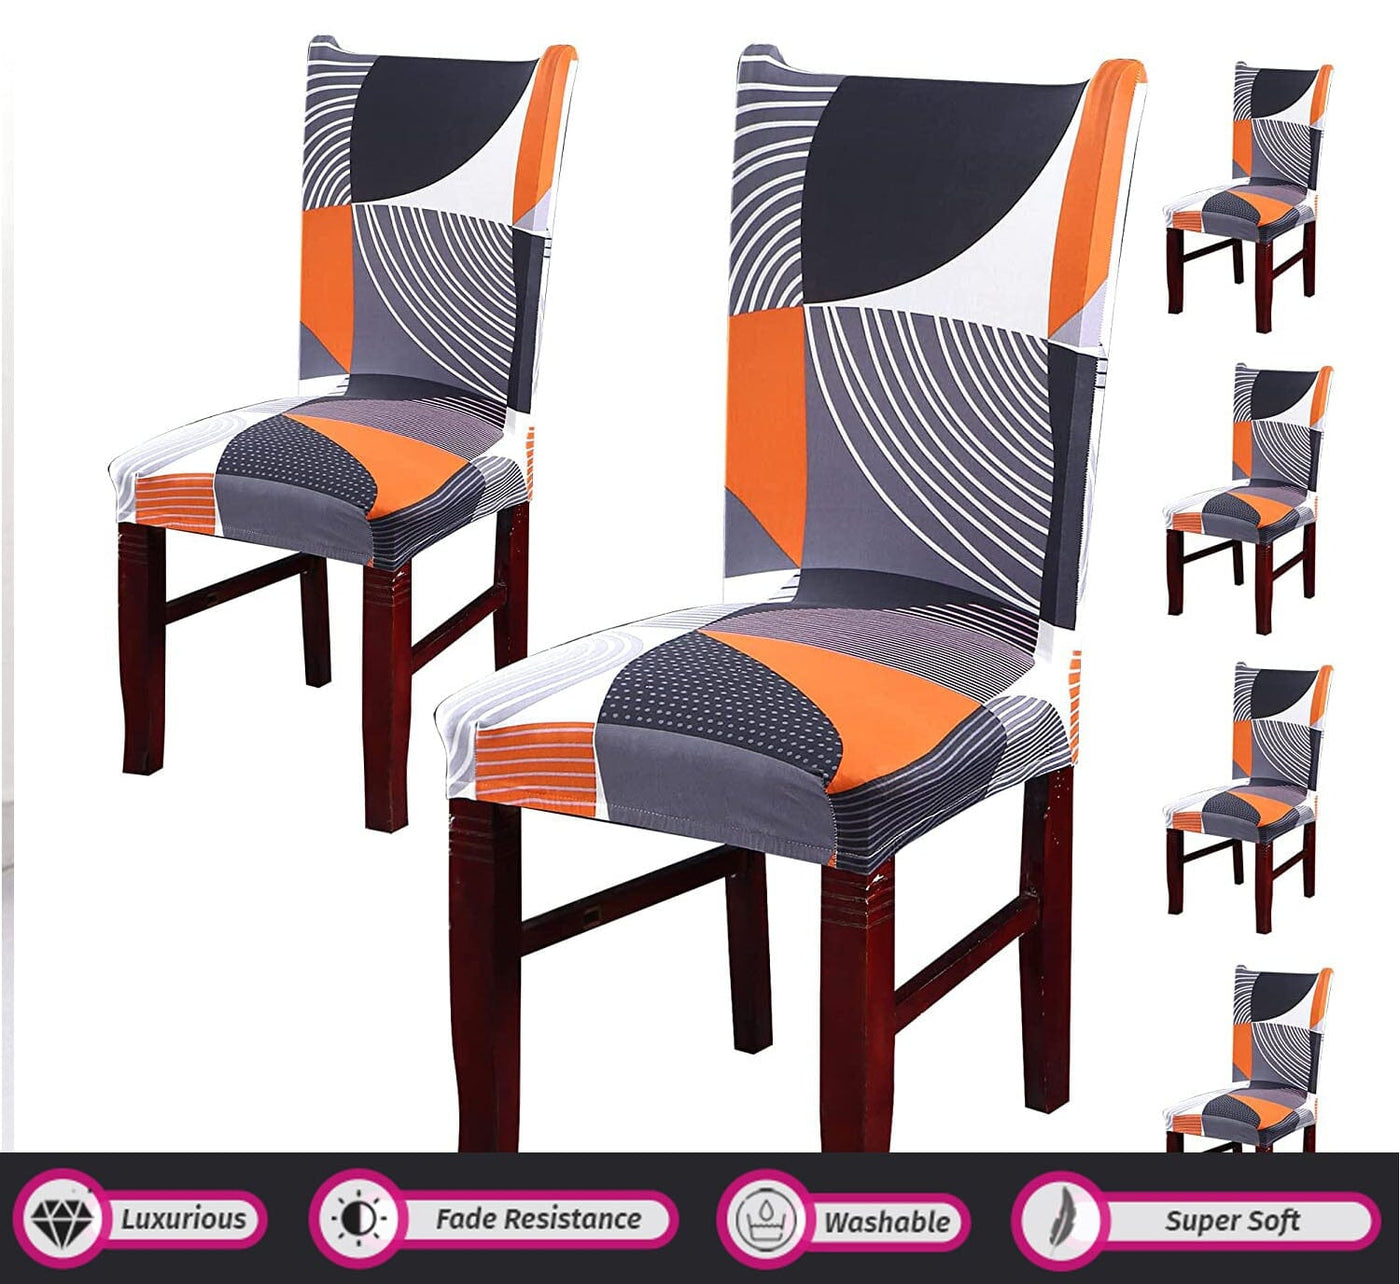 Premium Chair Cover - Stretchable & Elastic Fitted Great Happy IN Grey Orange Abstract 2 PCS - ₹799 